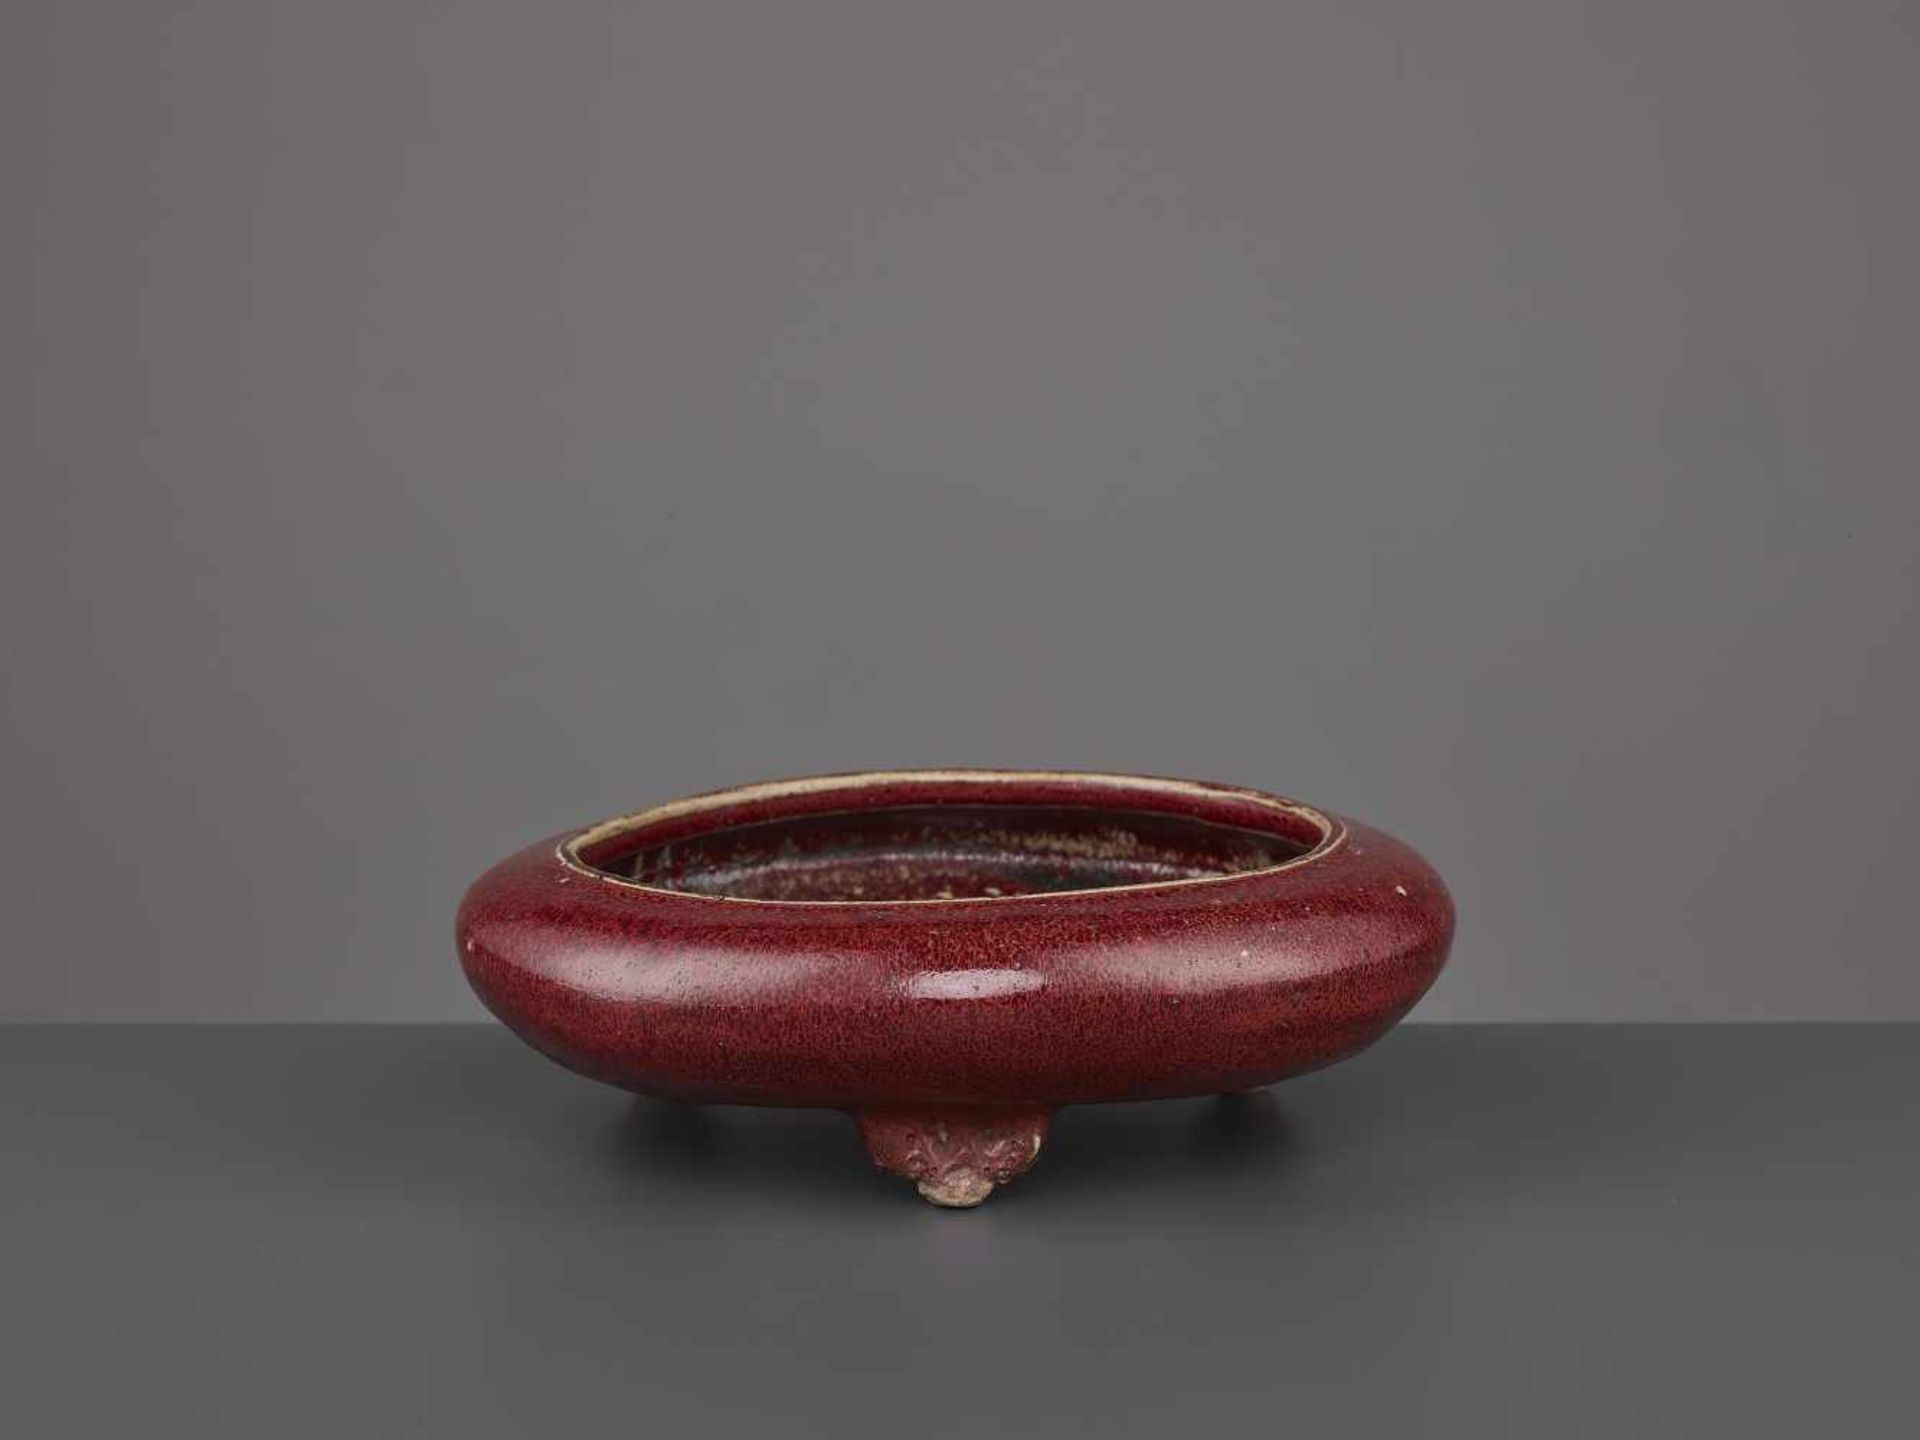 A LANGYAO CERAMIC BOWL, QING DYNASTYChina, 18th - 19th century. Vitreous deep-red glaze, featuring